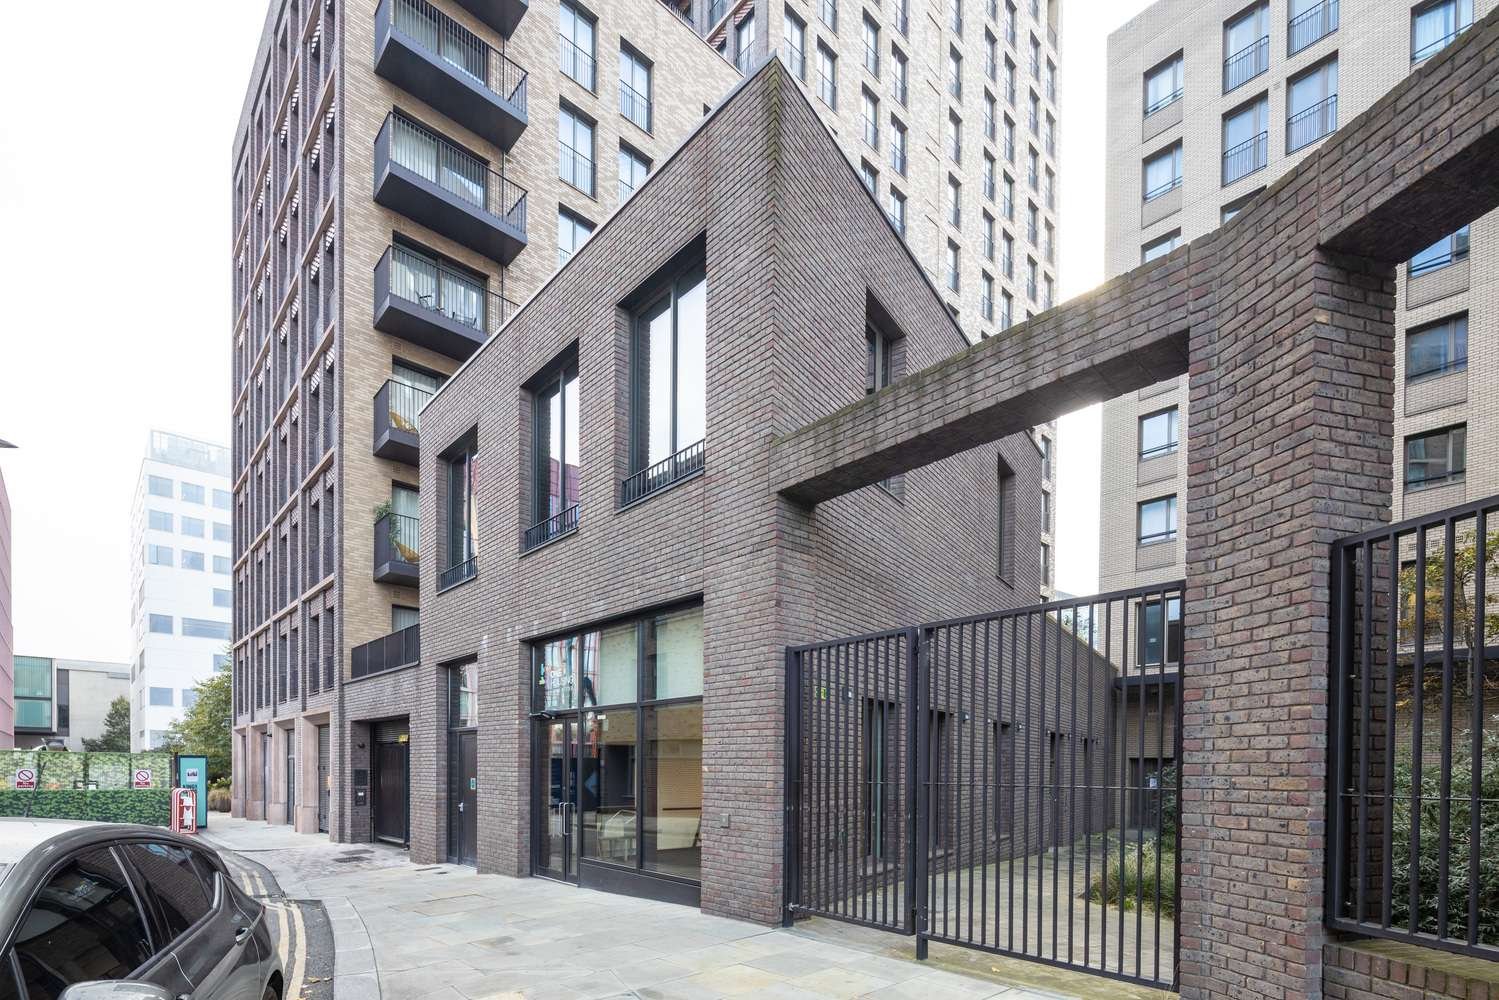 Open Call: New London Architecture and King's Cross launch a public competition to find the best new community offer for 2-storey premises within the Estate